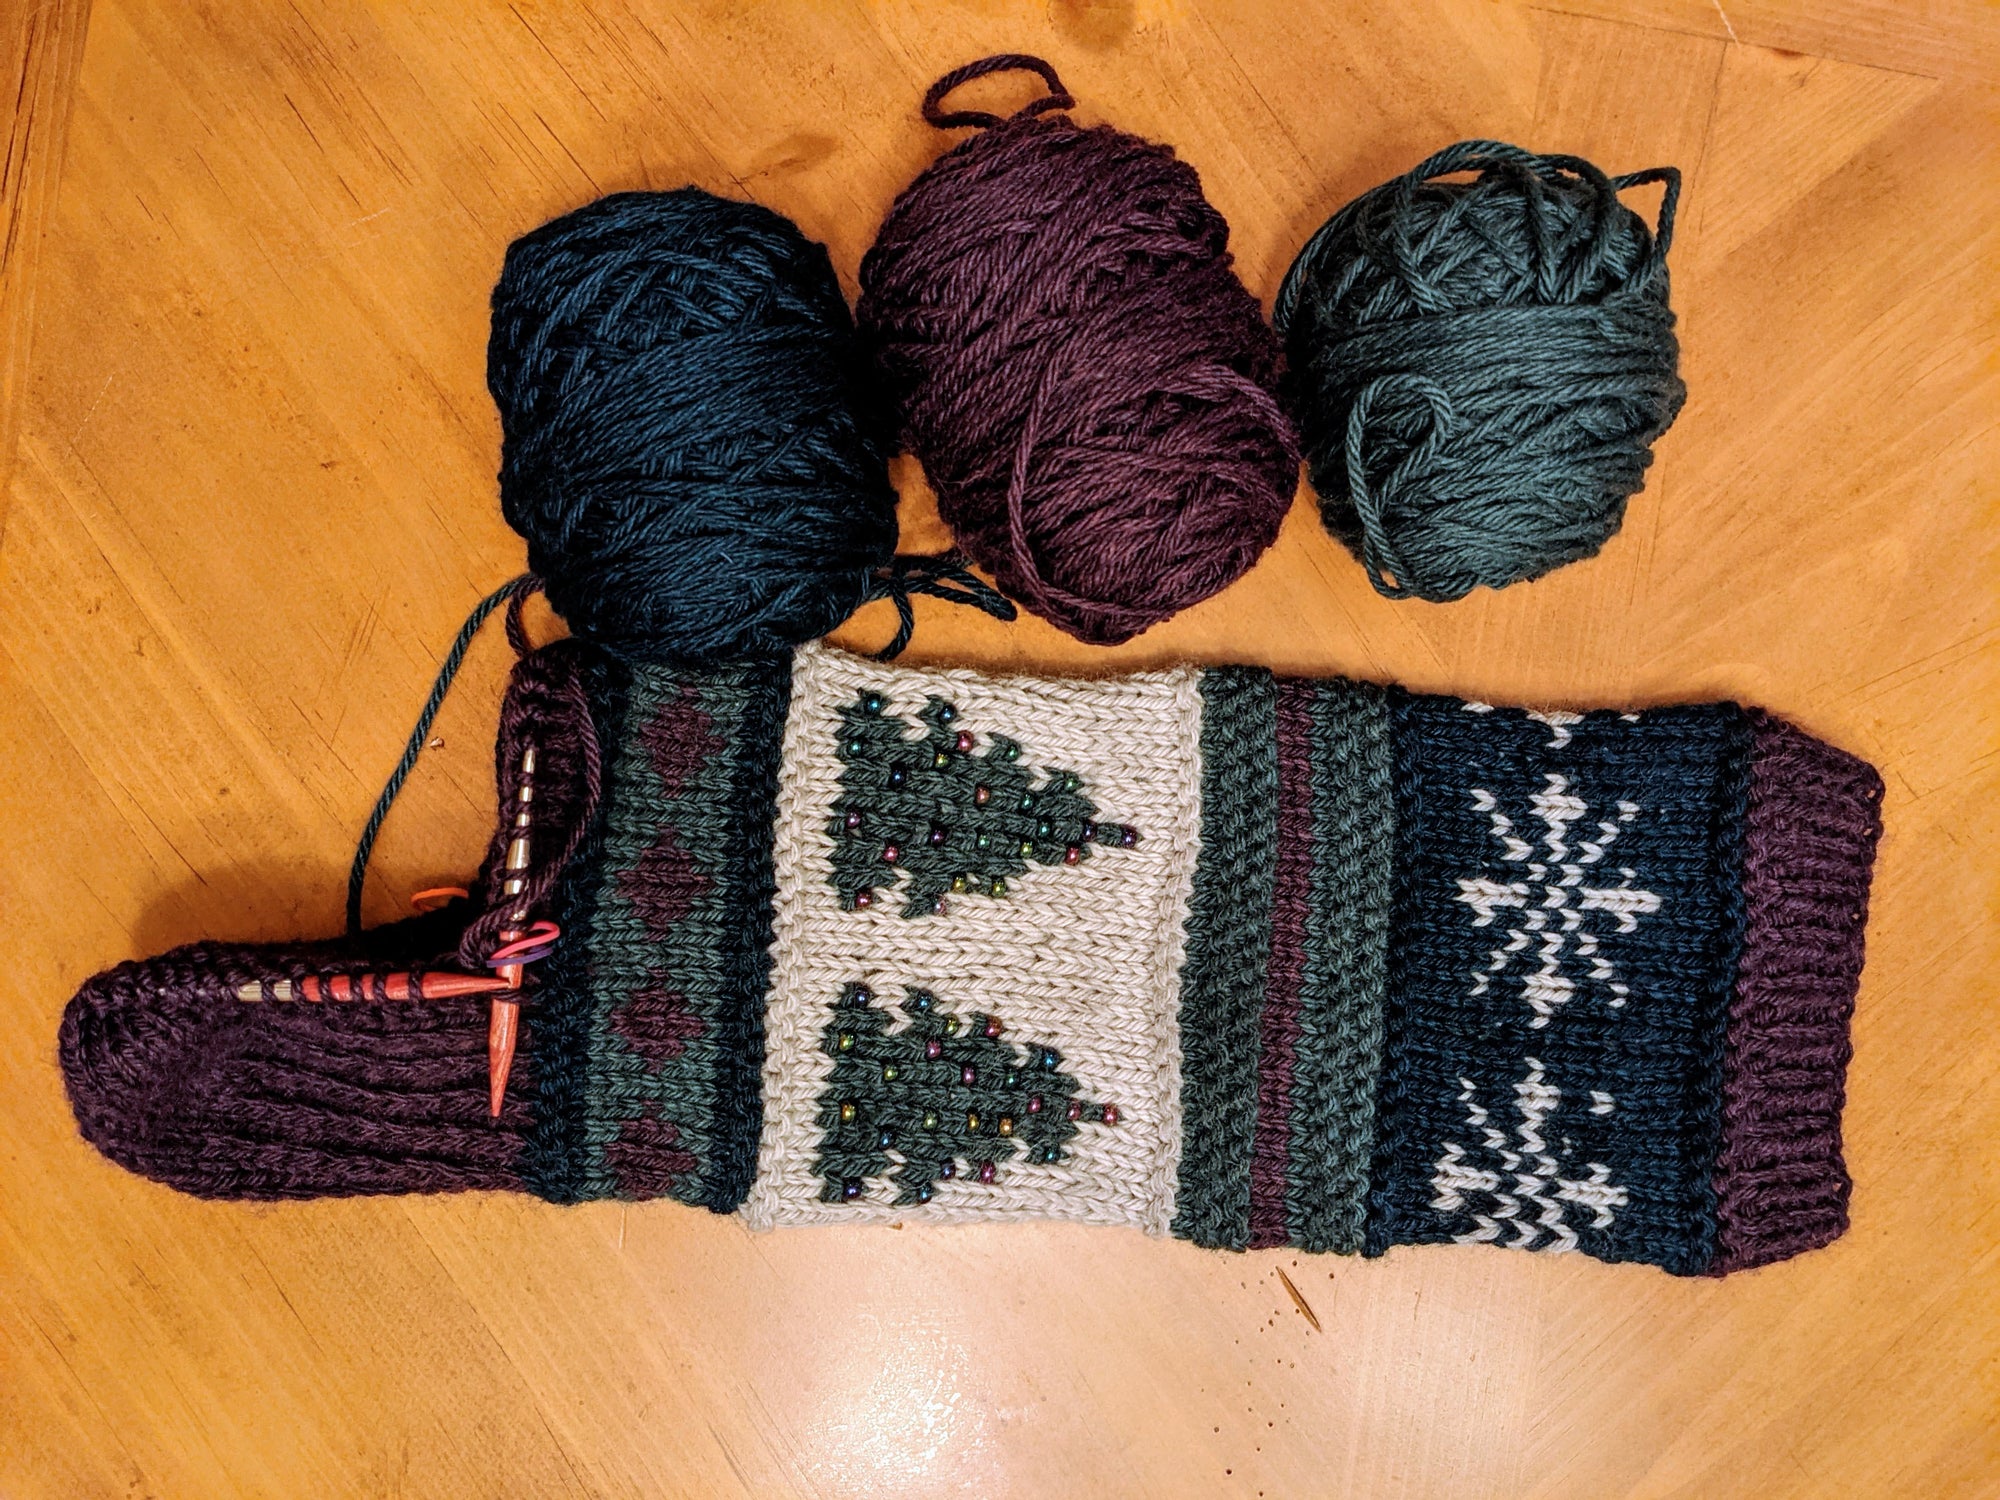 Holiday Stocking Knitting Tips for Beads & Afterthought Heels